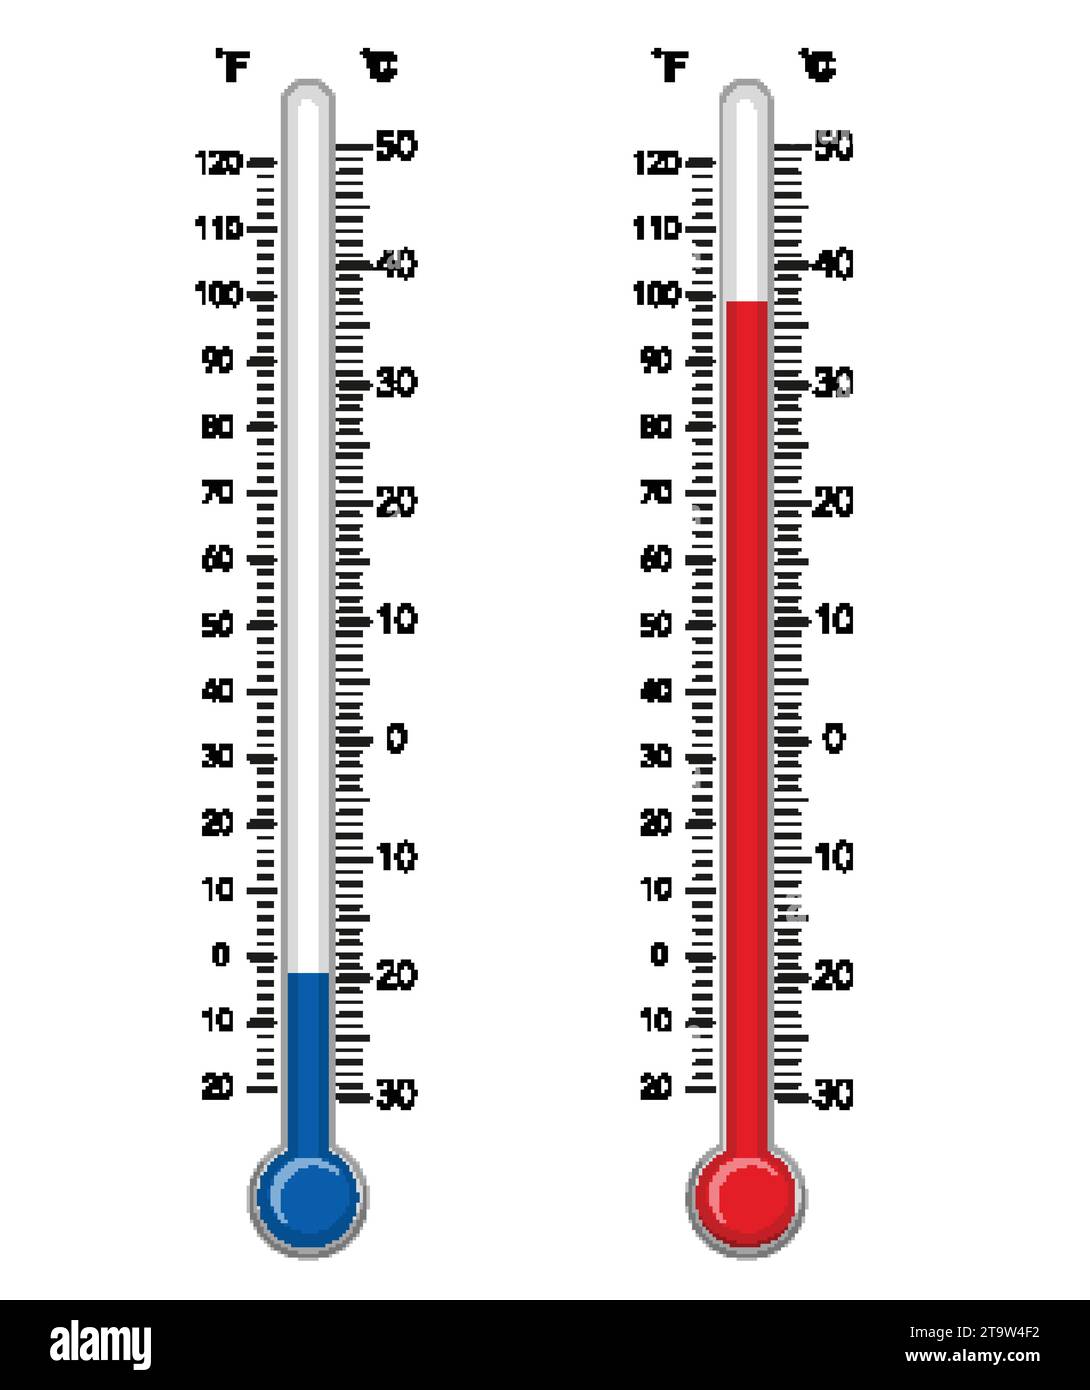 https://c8.alamy.com/comp/2T9W4F2/hot-and-cold-meteorology-thermometers-on-transparent-background-blue-and-red-thermometers-vector-illustration-2T9W4F2.jpg